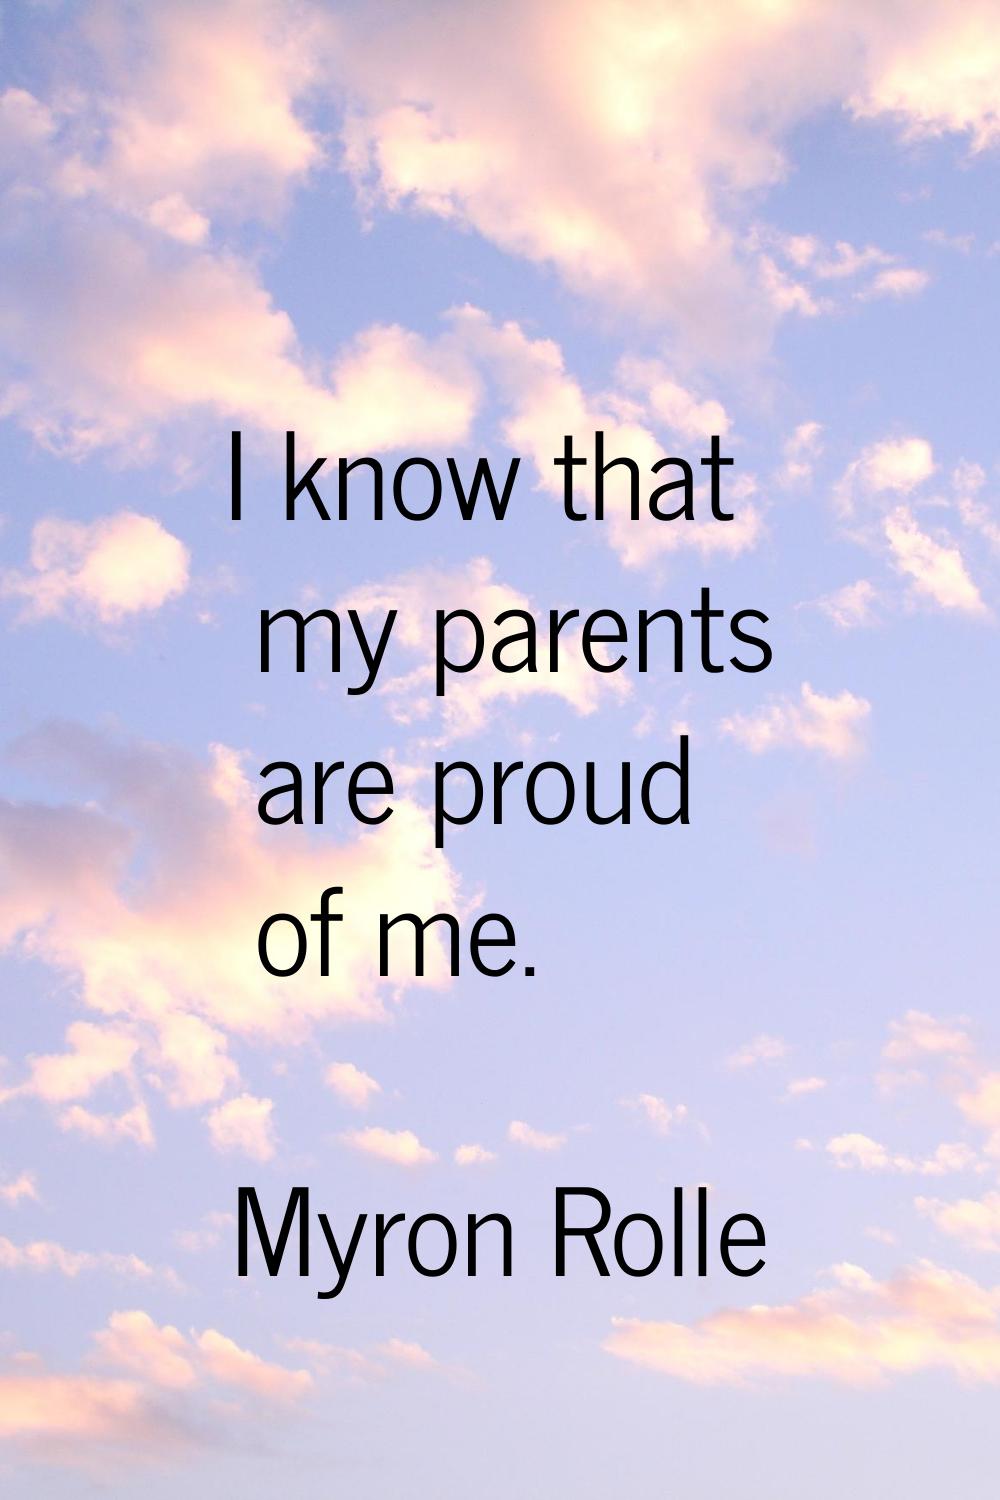 I know that my parents are proud of me.